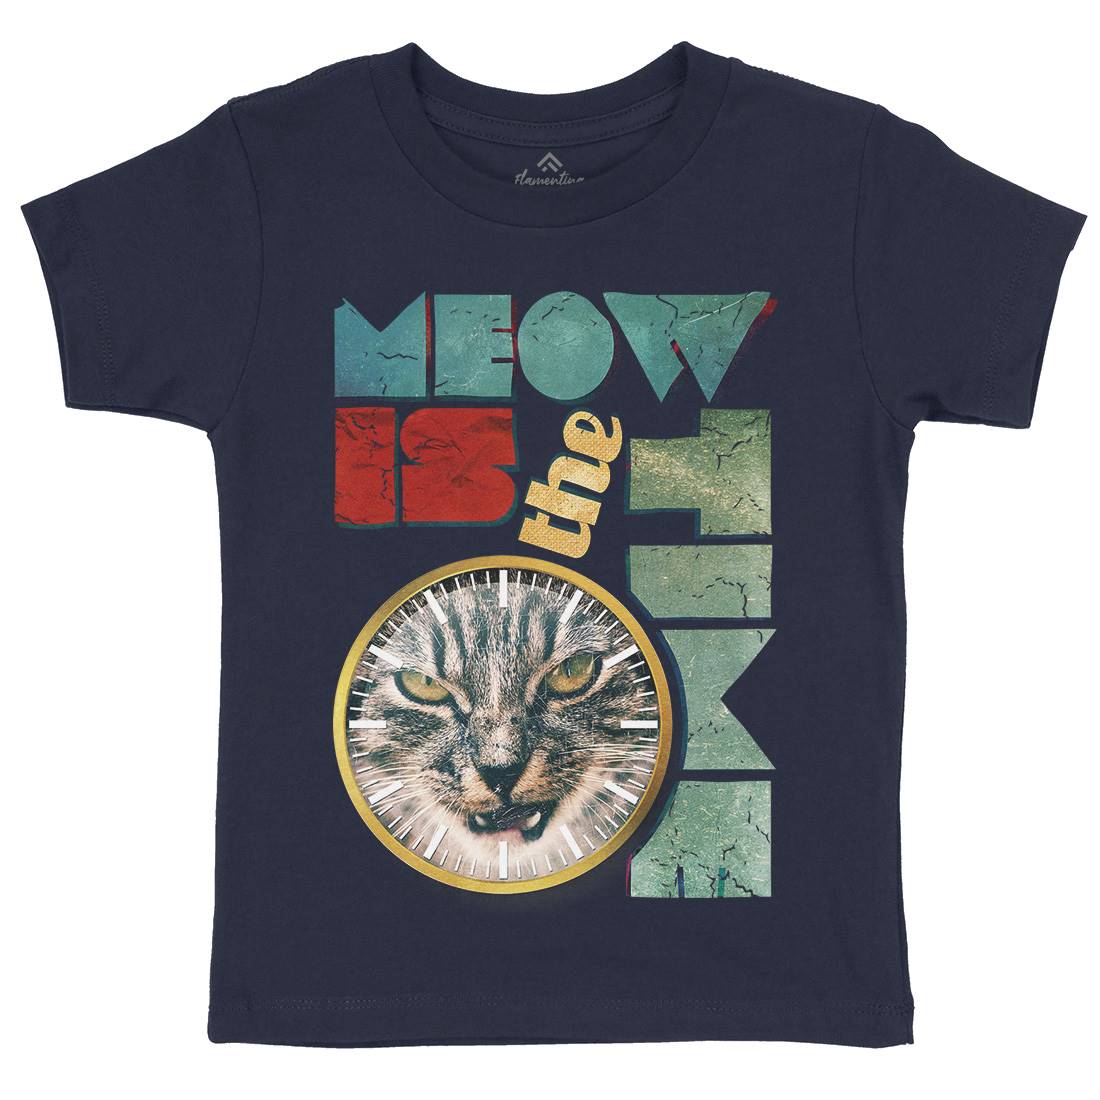 Meow Is The Time Kids Crew Neck T-Shirt Animals A876